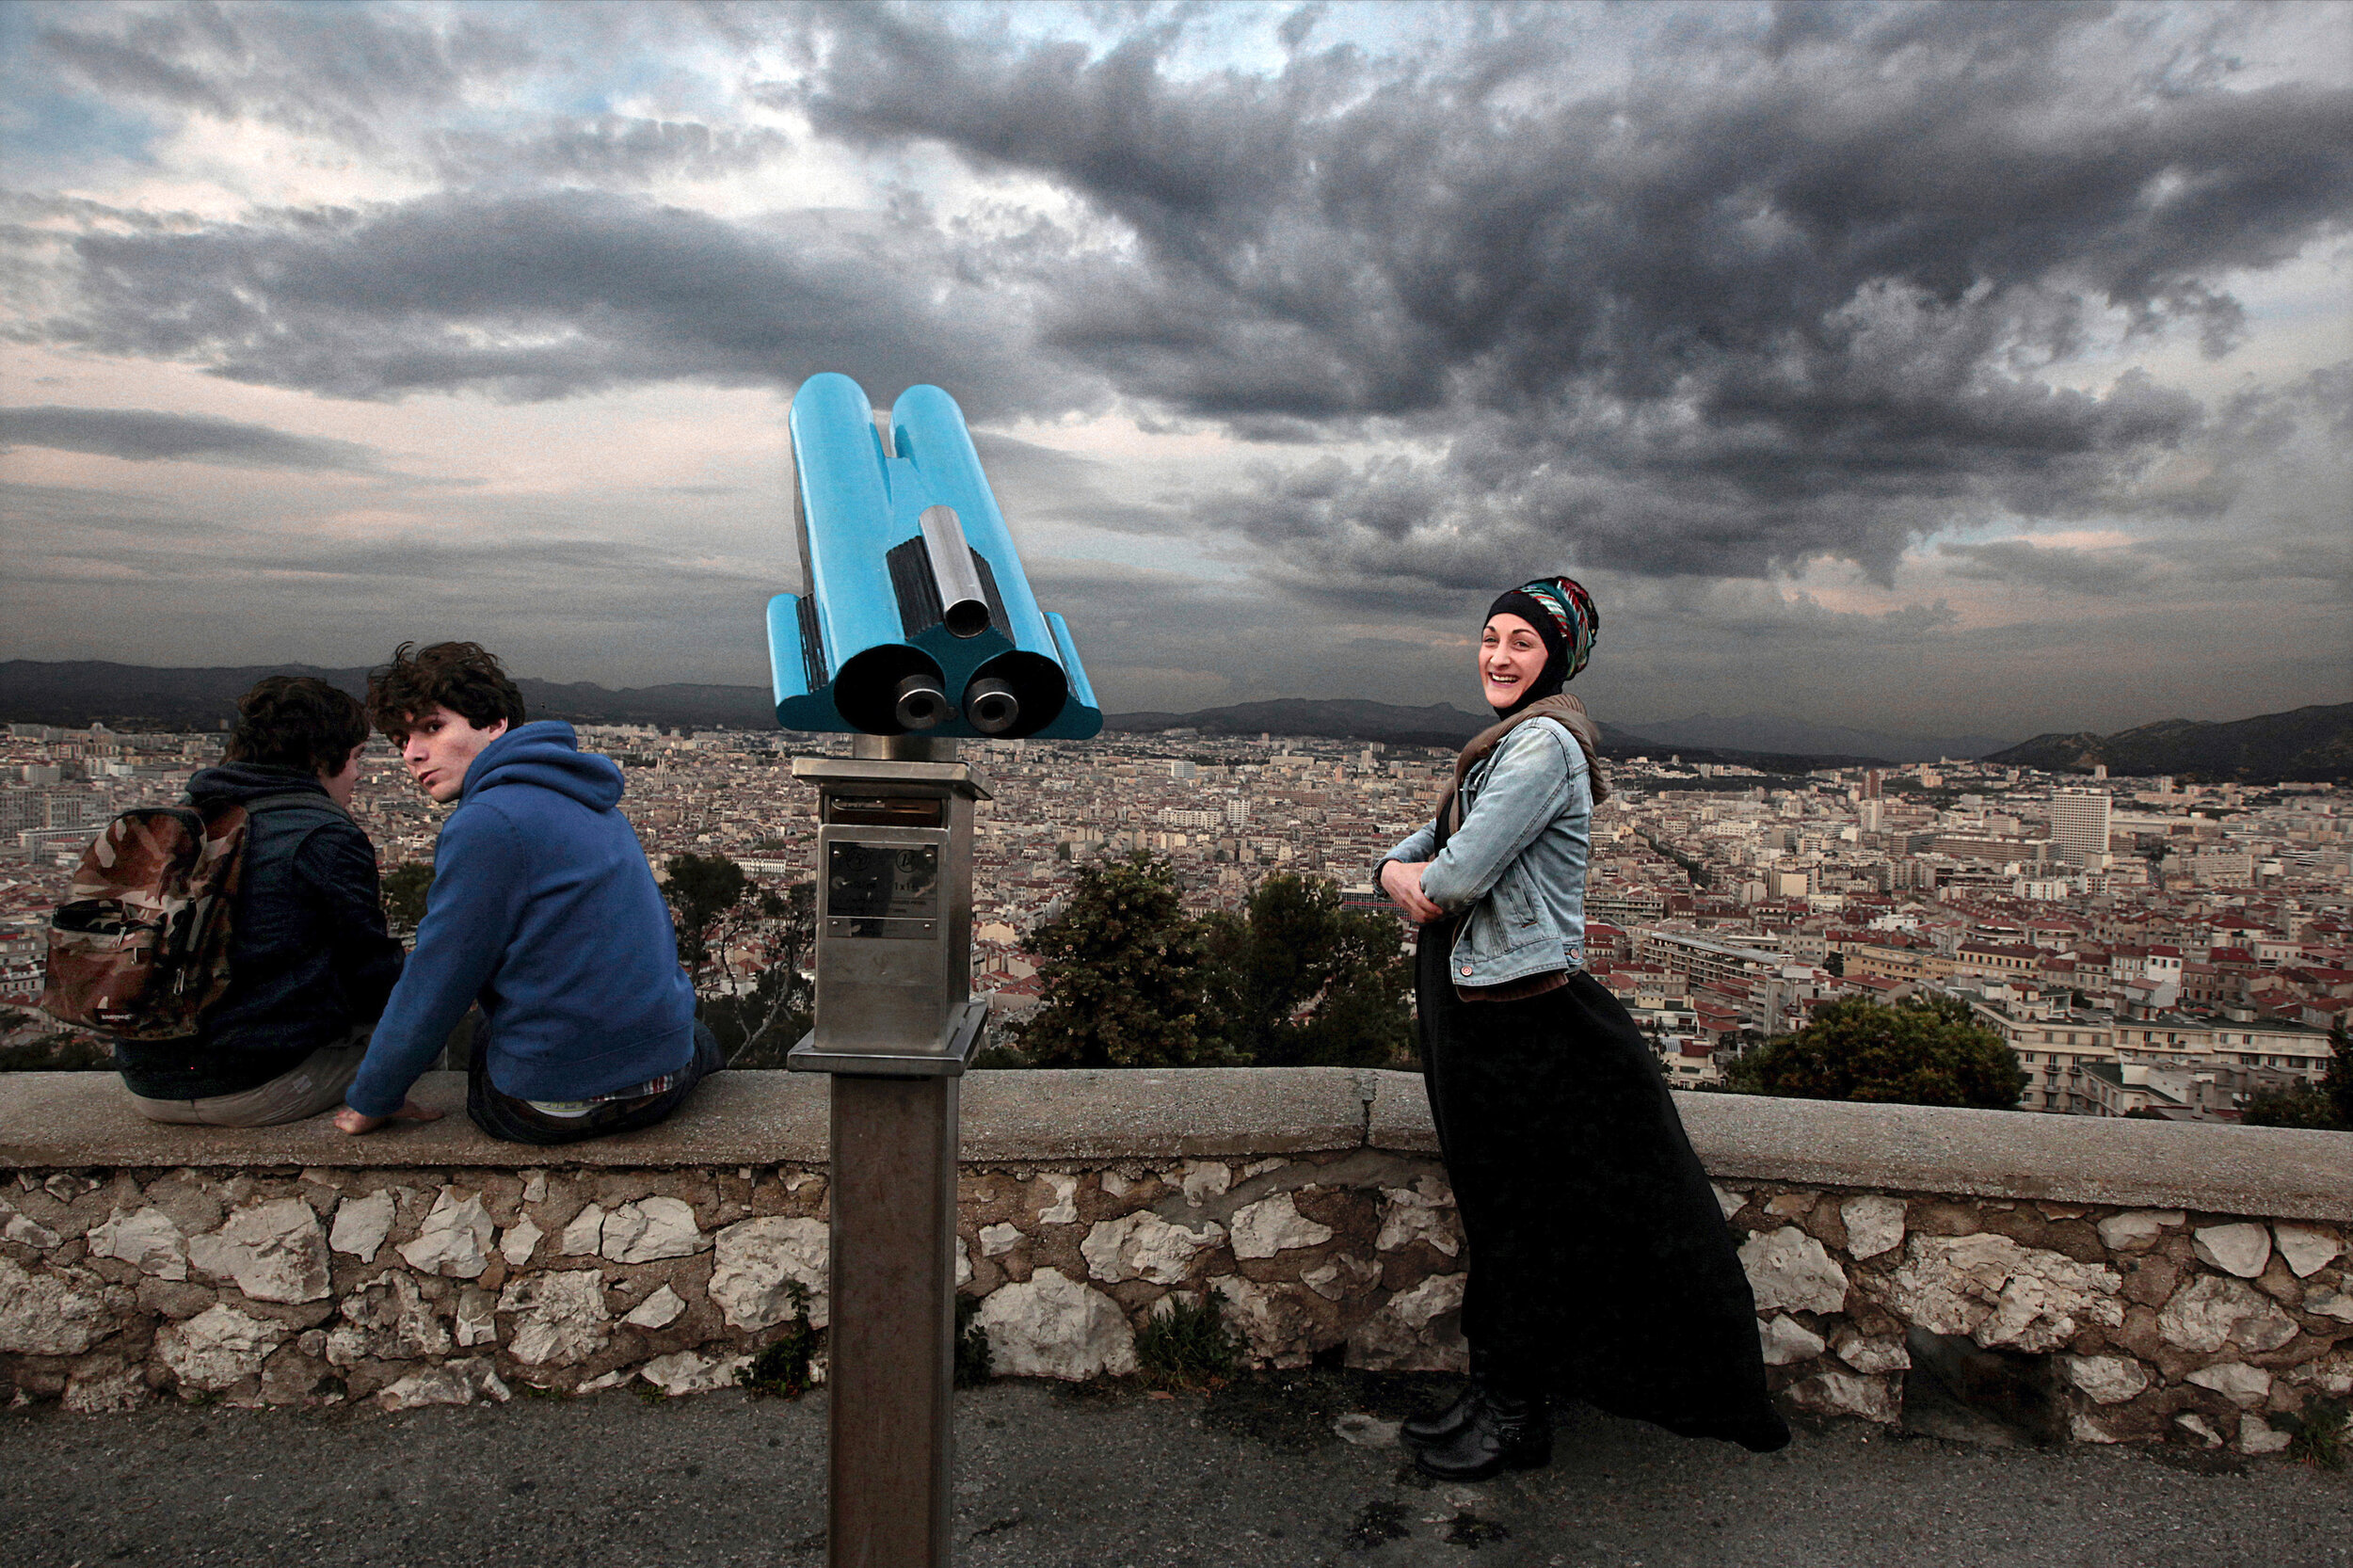   France. Marseille. 2014. Camille (right), a convert to Islam, enjoys the view atop the hill of Notre Dame de la Garde. On being asked why she embraced Islam, she said, “A few years ago, while walking I saw many Muslim men praying on the side of a b